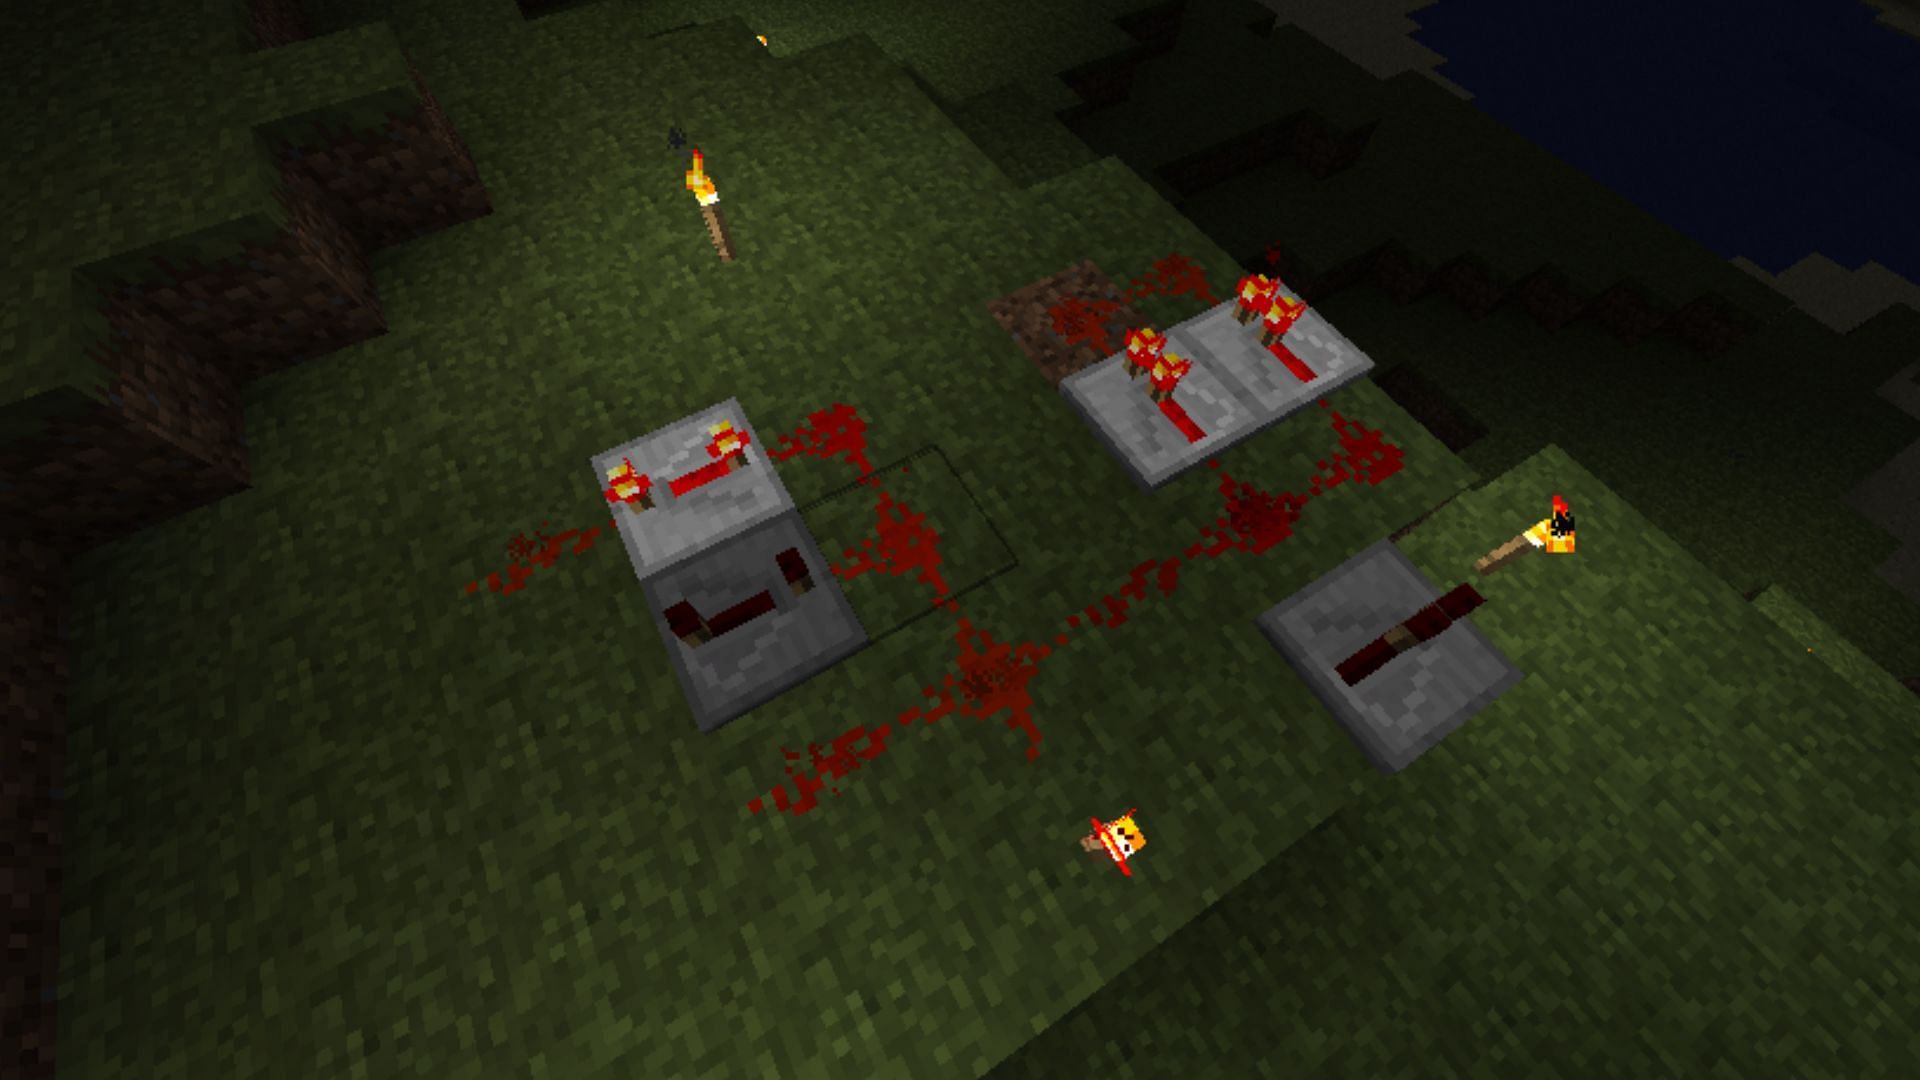 Redstone repeaters can be used to repeat, delay, and even prevent signals in Minecraft (Image via Mojang)